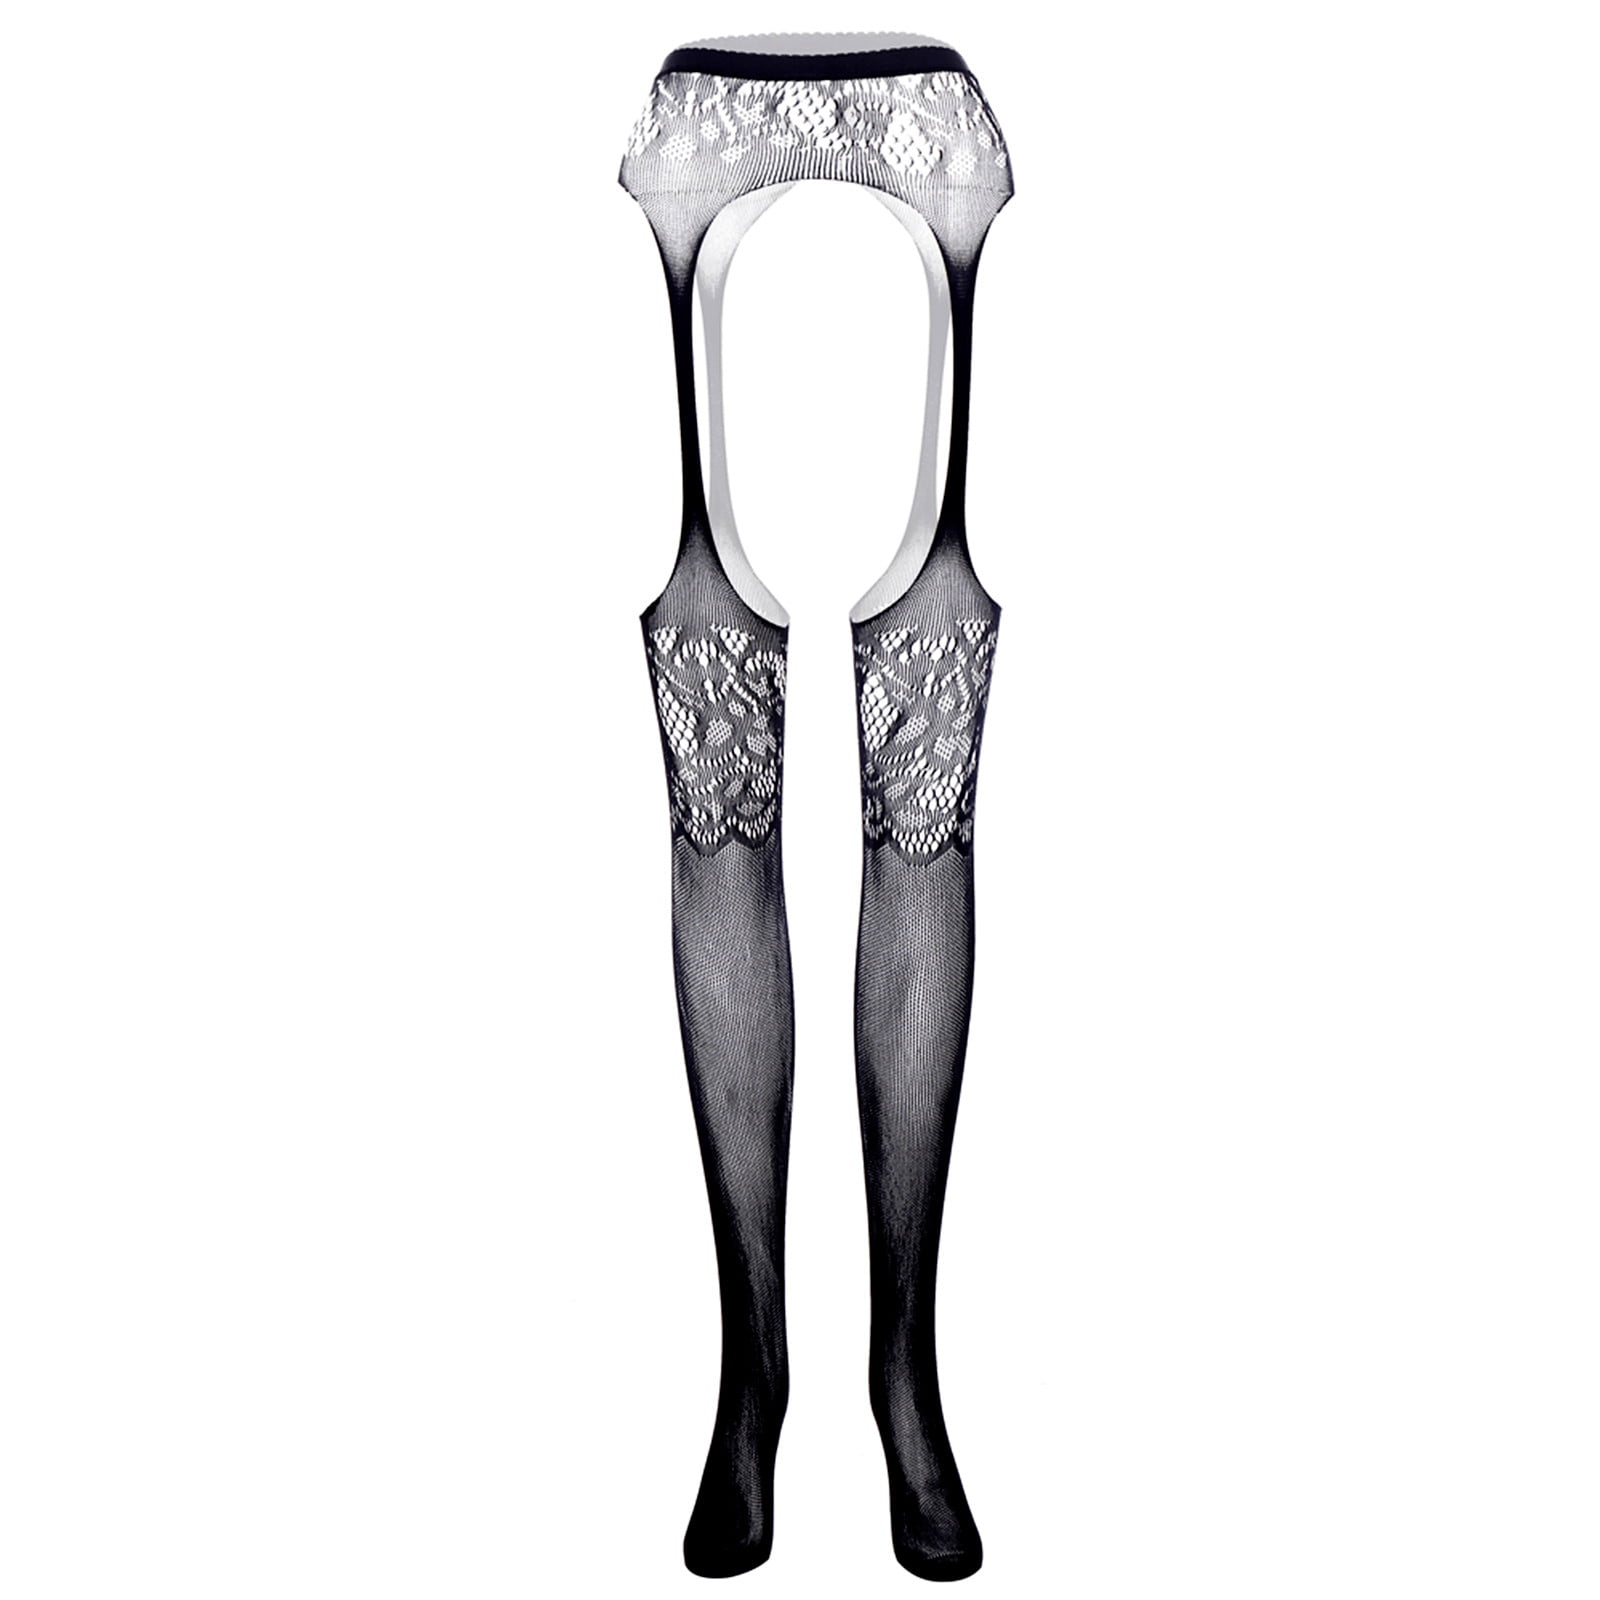 Women Sheer Net Lace Tights Top Garter Belt Thigh Pantyhose Over Knee  Erotic Hosiery Stay-up Stockings · KoKo Fashion · Online Store Powered by  Storenvy